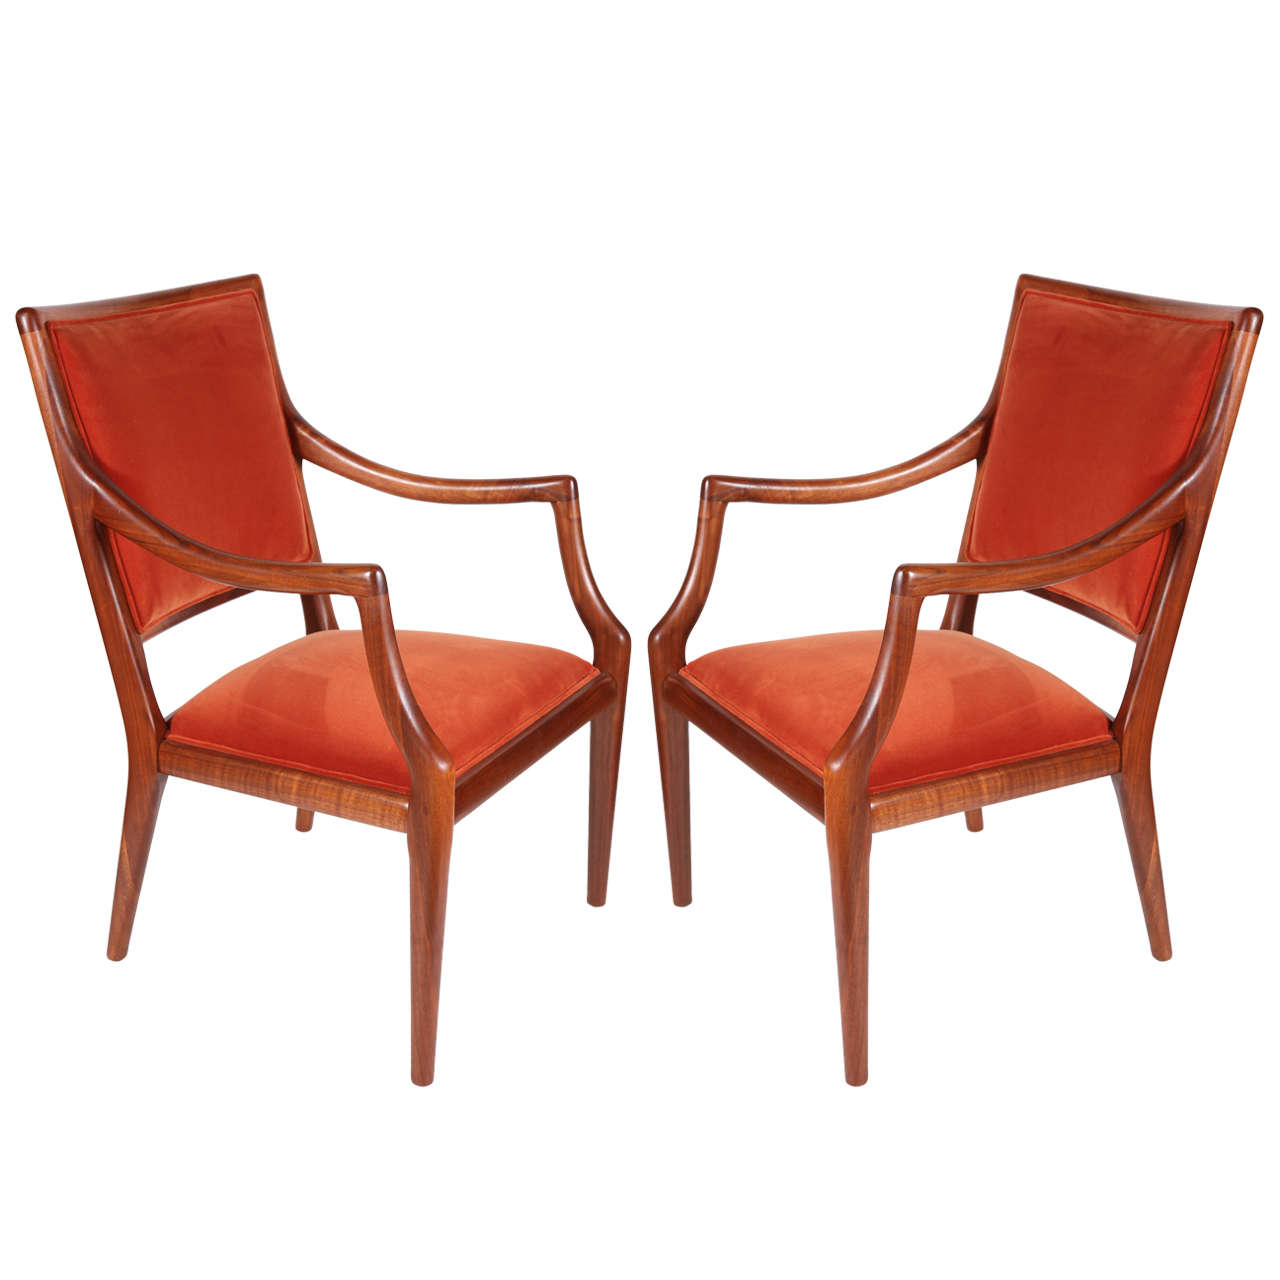 Pair of "Grand Haven" Chairs by Jamestown Lounge Co.